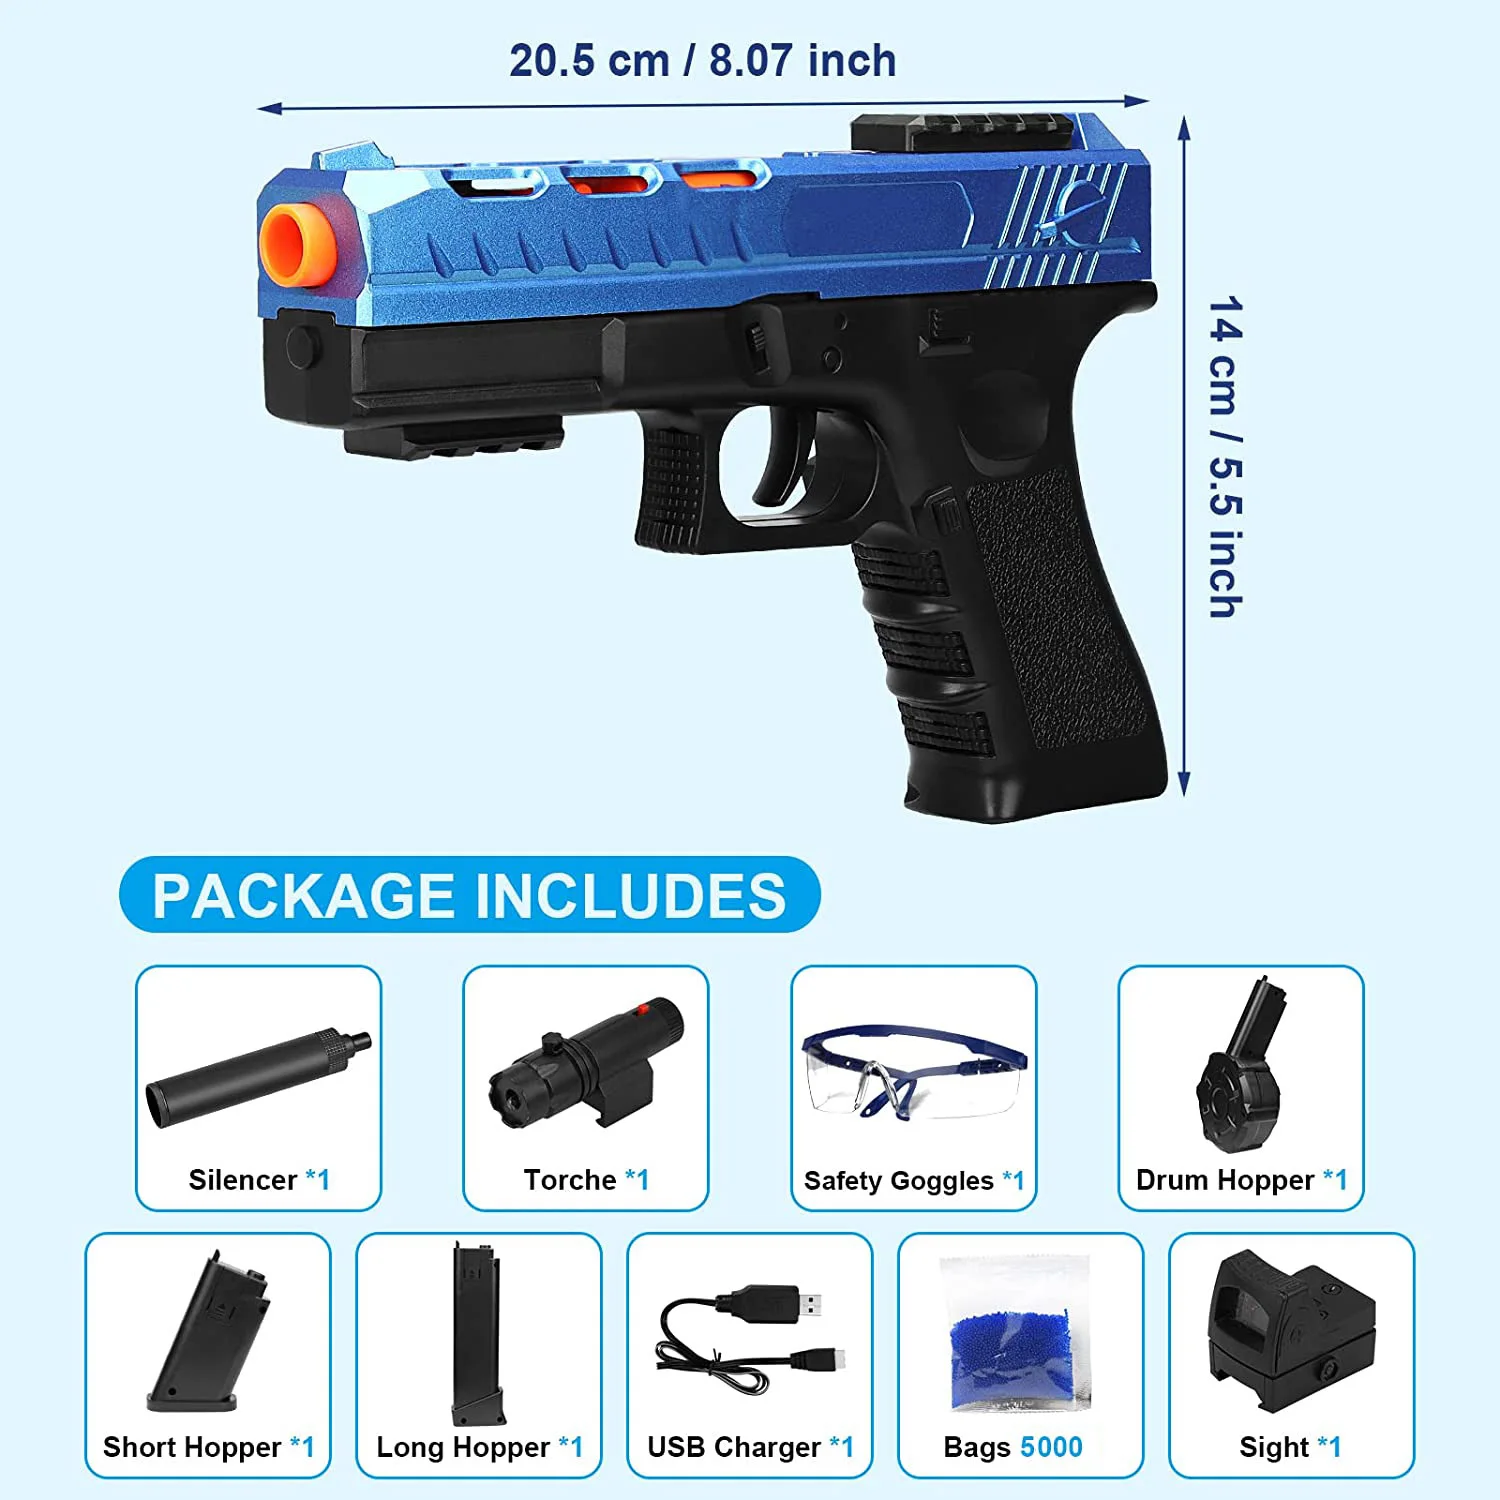 

Glock Electric Splatter Gun Gel Ball Blaster Toy Pistol With 10000 Eco-Friendly Water Beads Goggles Outdoor CS Game Kids Toys